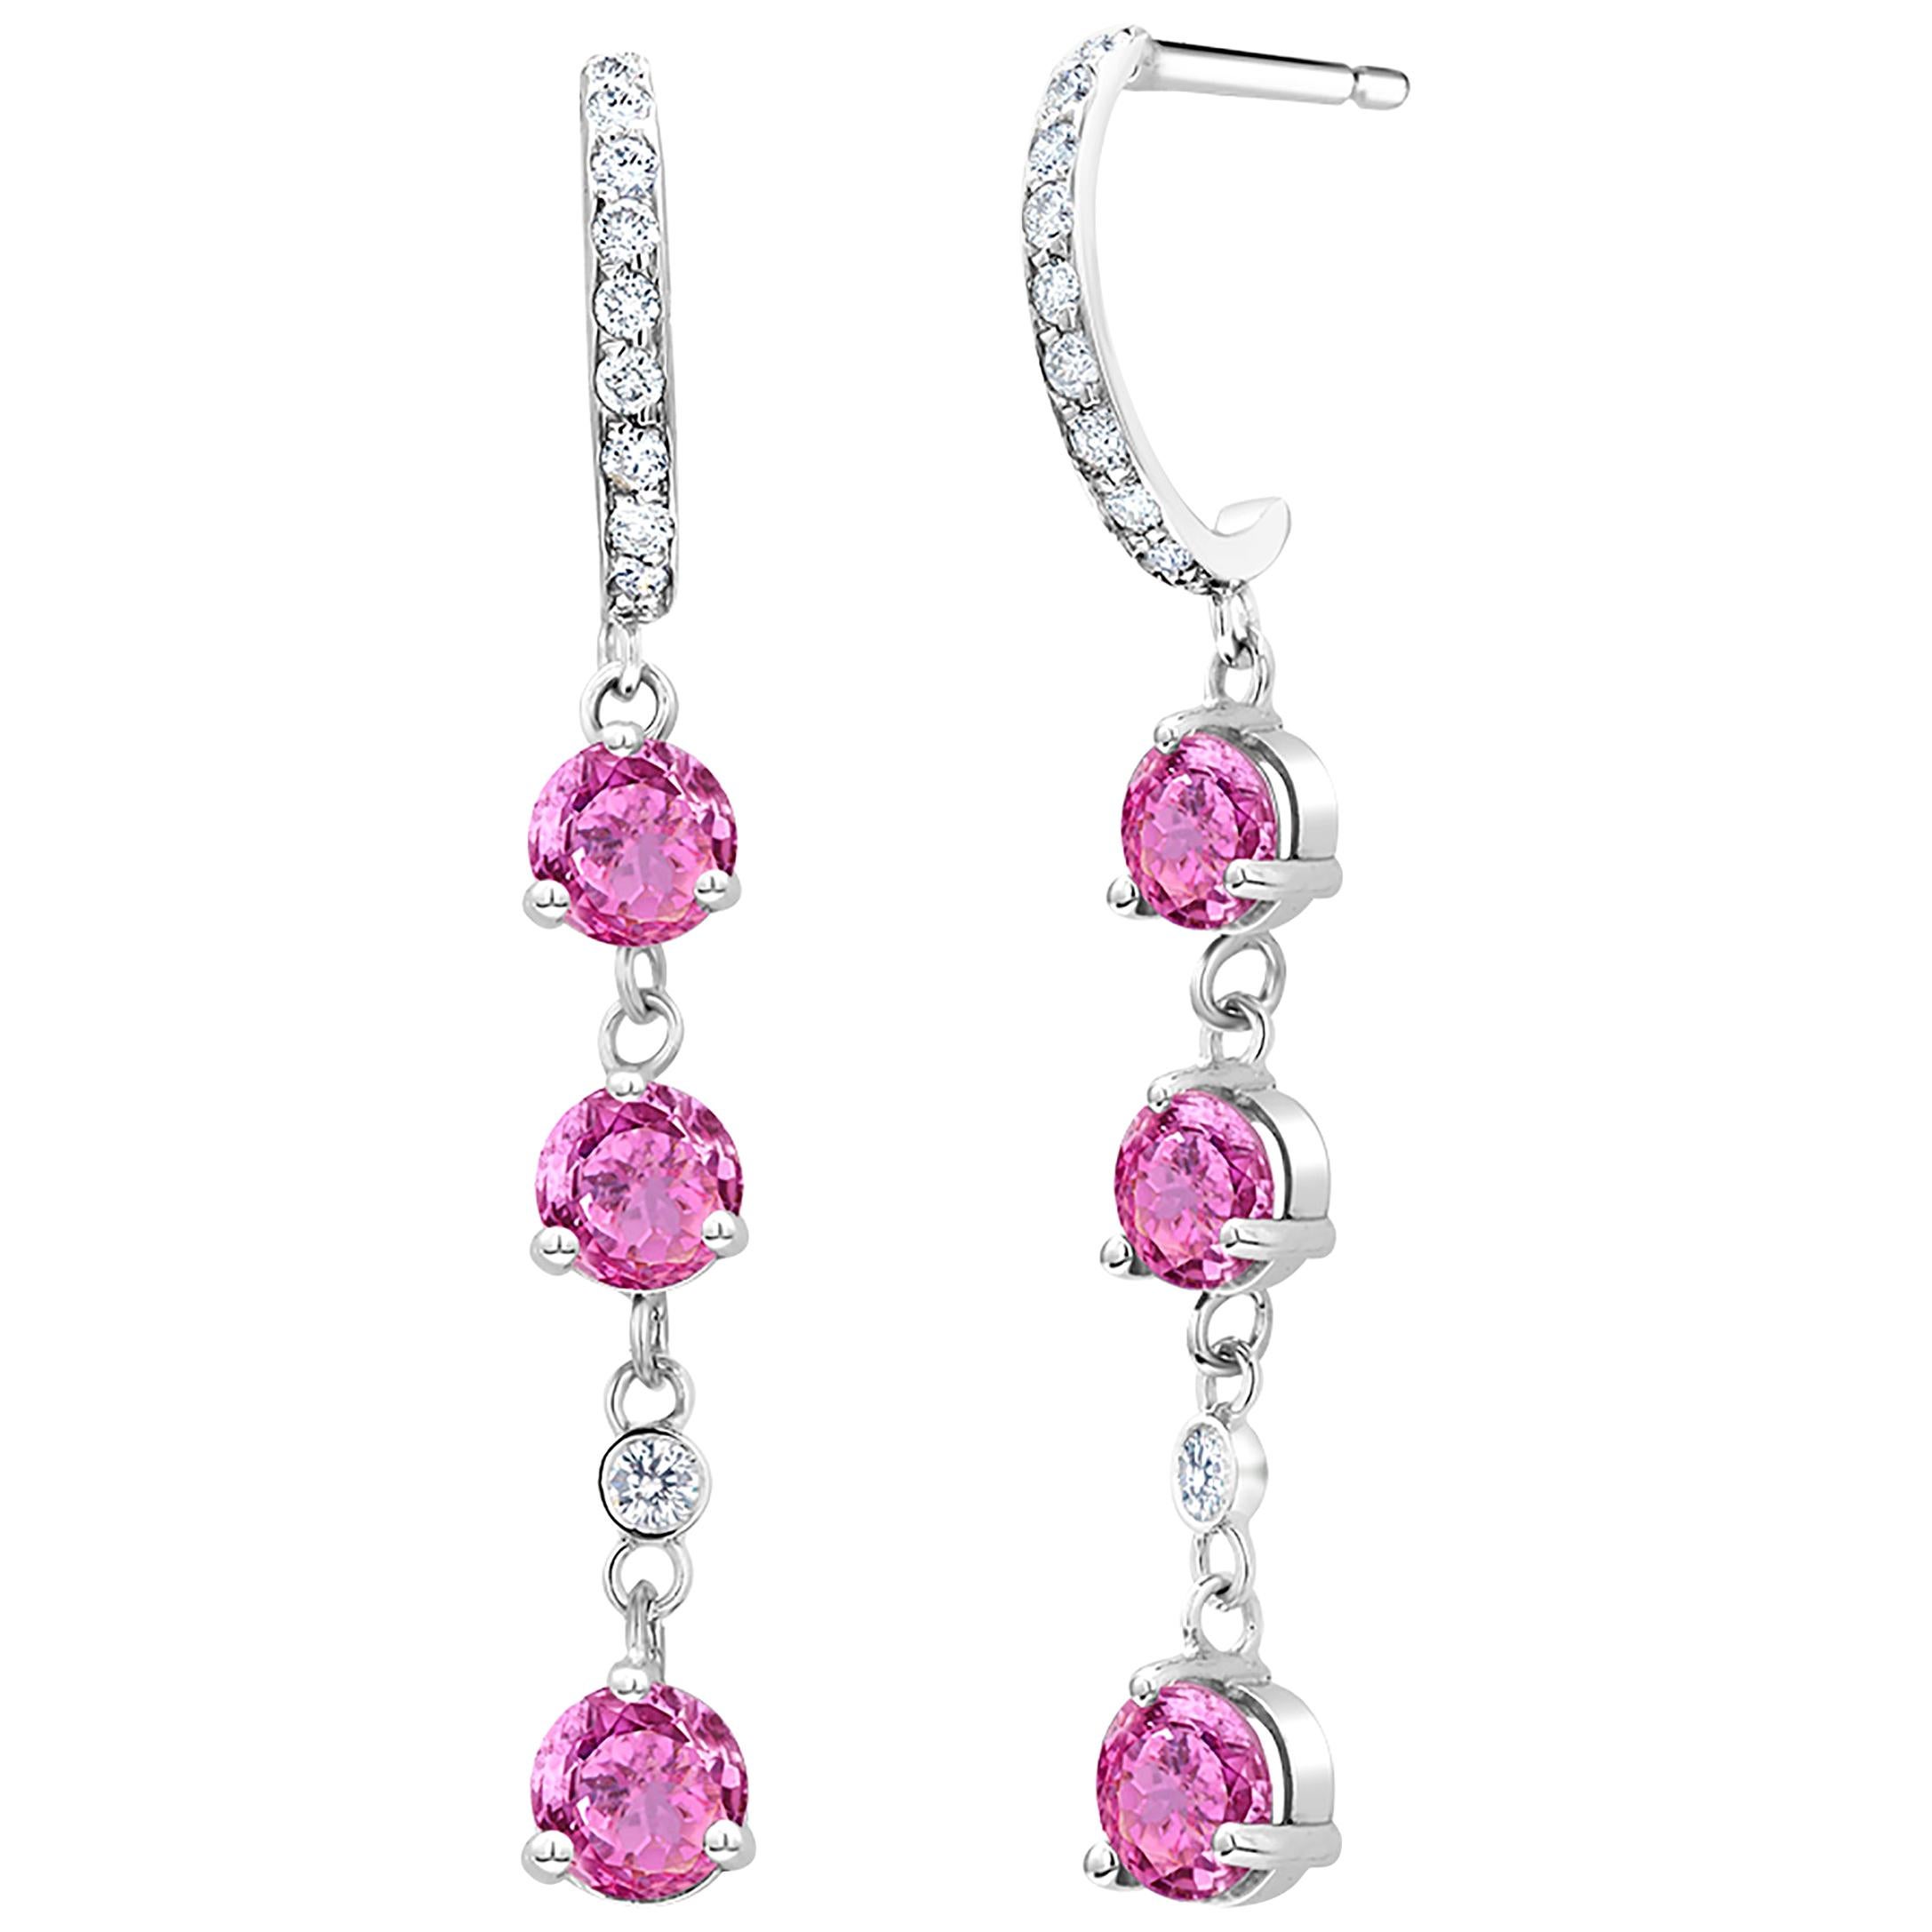 Six Round Pink Ceylon Sapphires and Diamond White Gold Hoop Drop Earrings